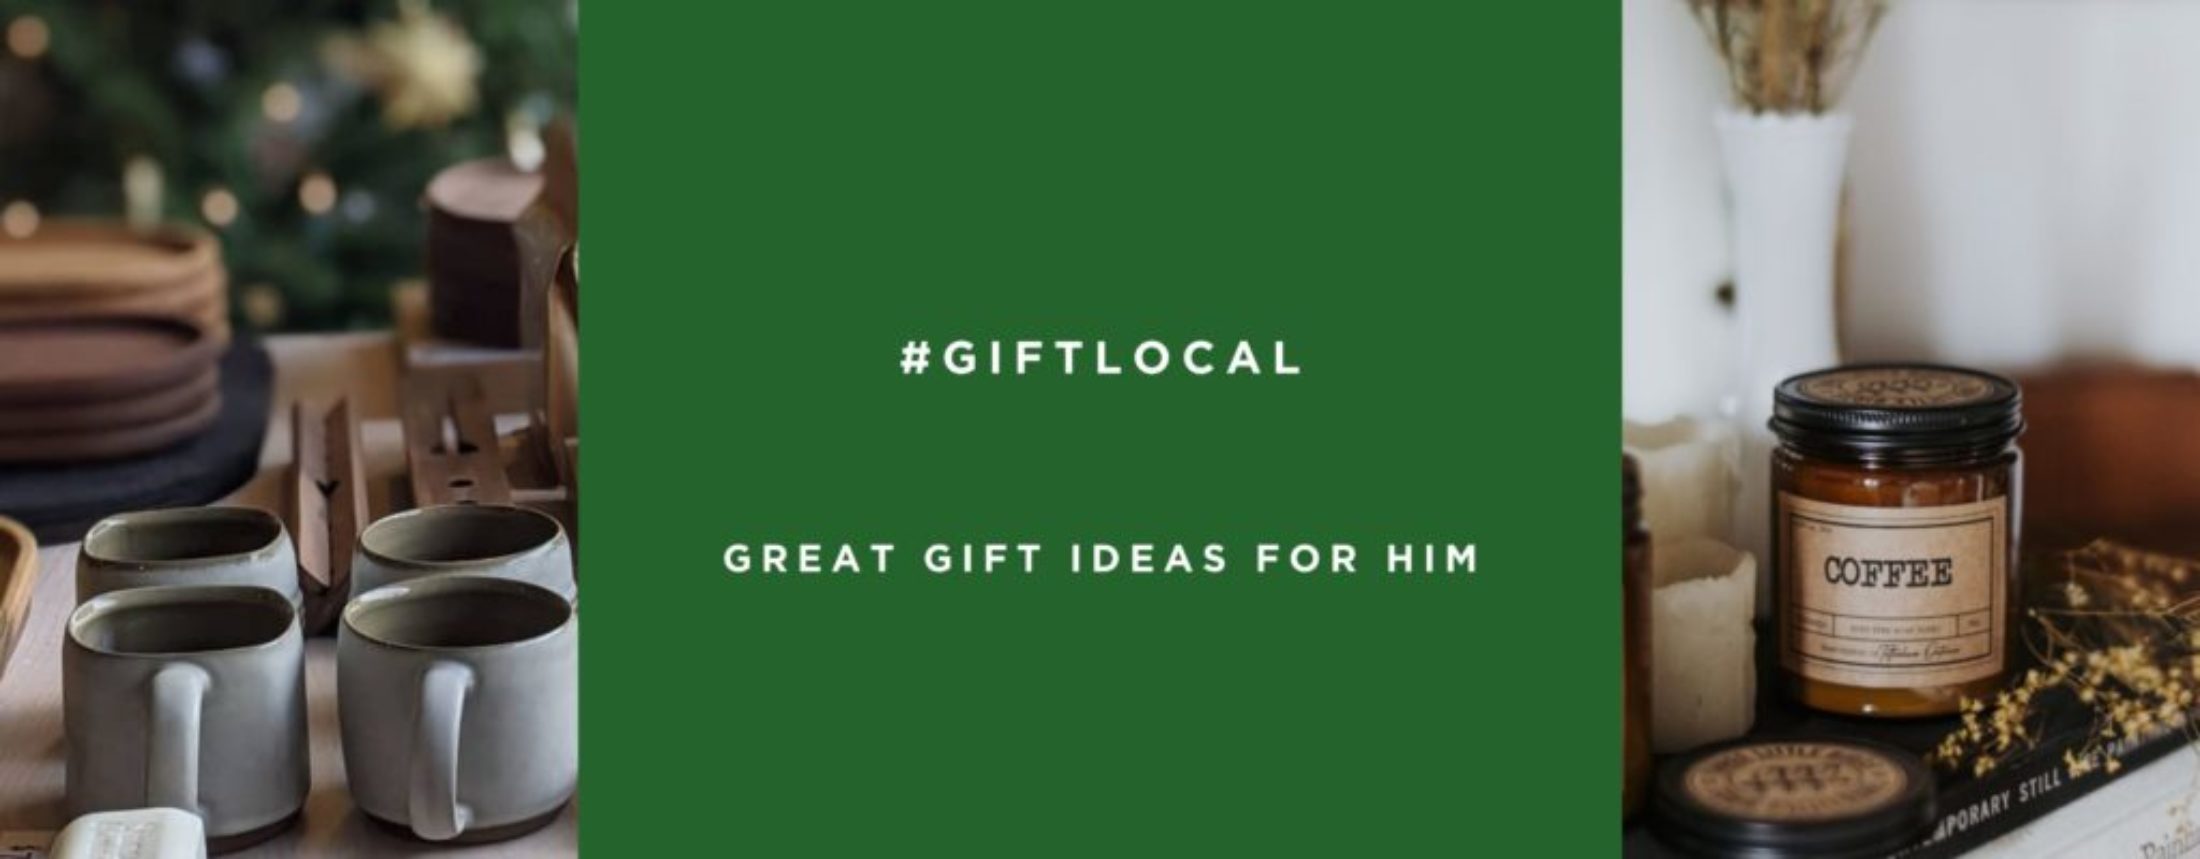 gift local gifts for him